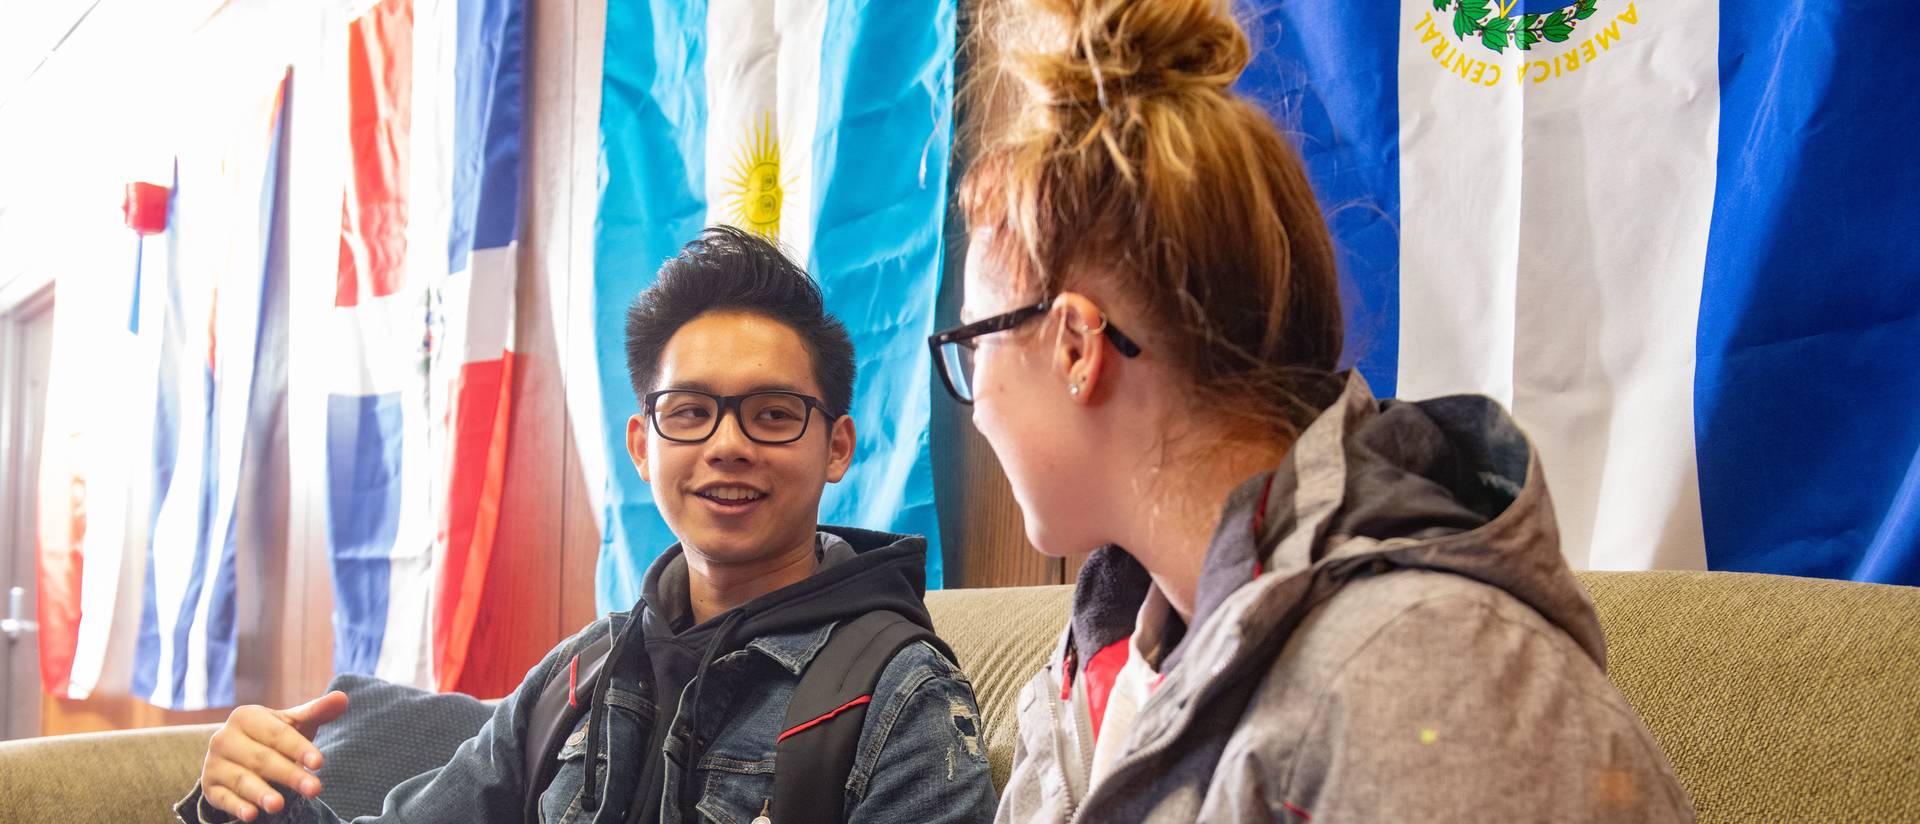 Two students chat in front of flags.